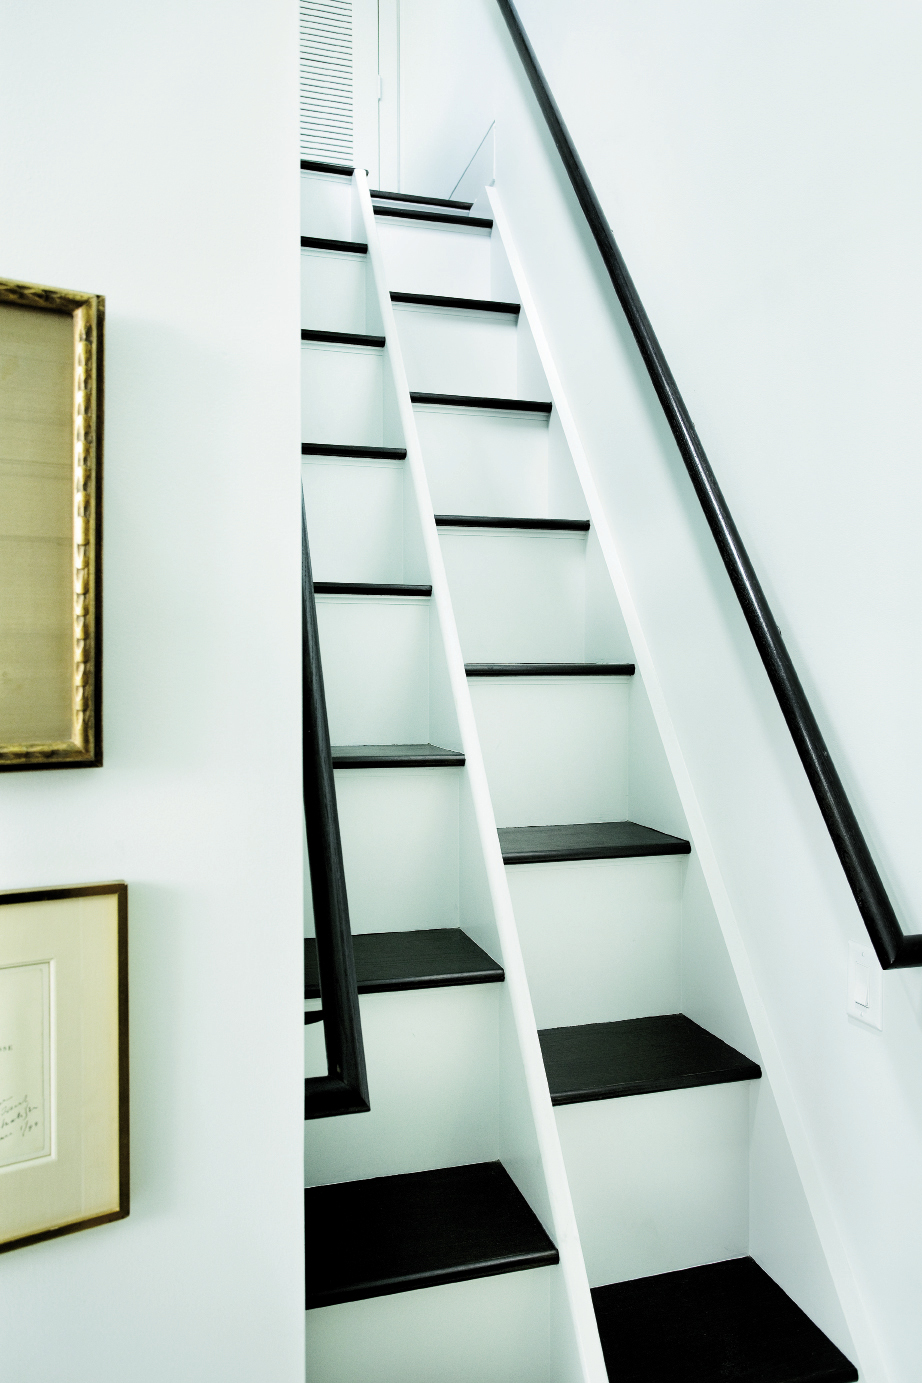 Chris designed these innovative ladder-like steps to access Kathleen’s office over the master bedroom.